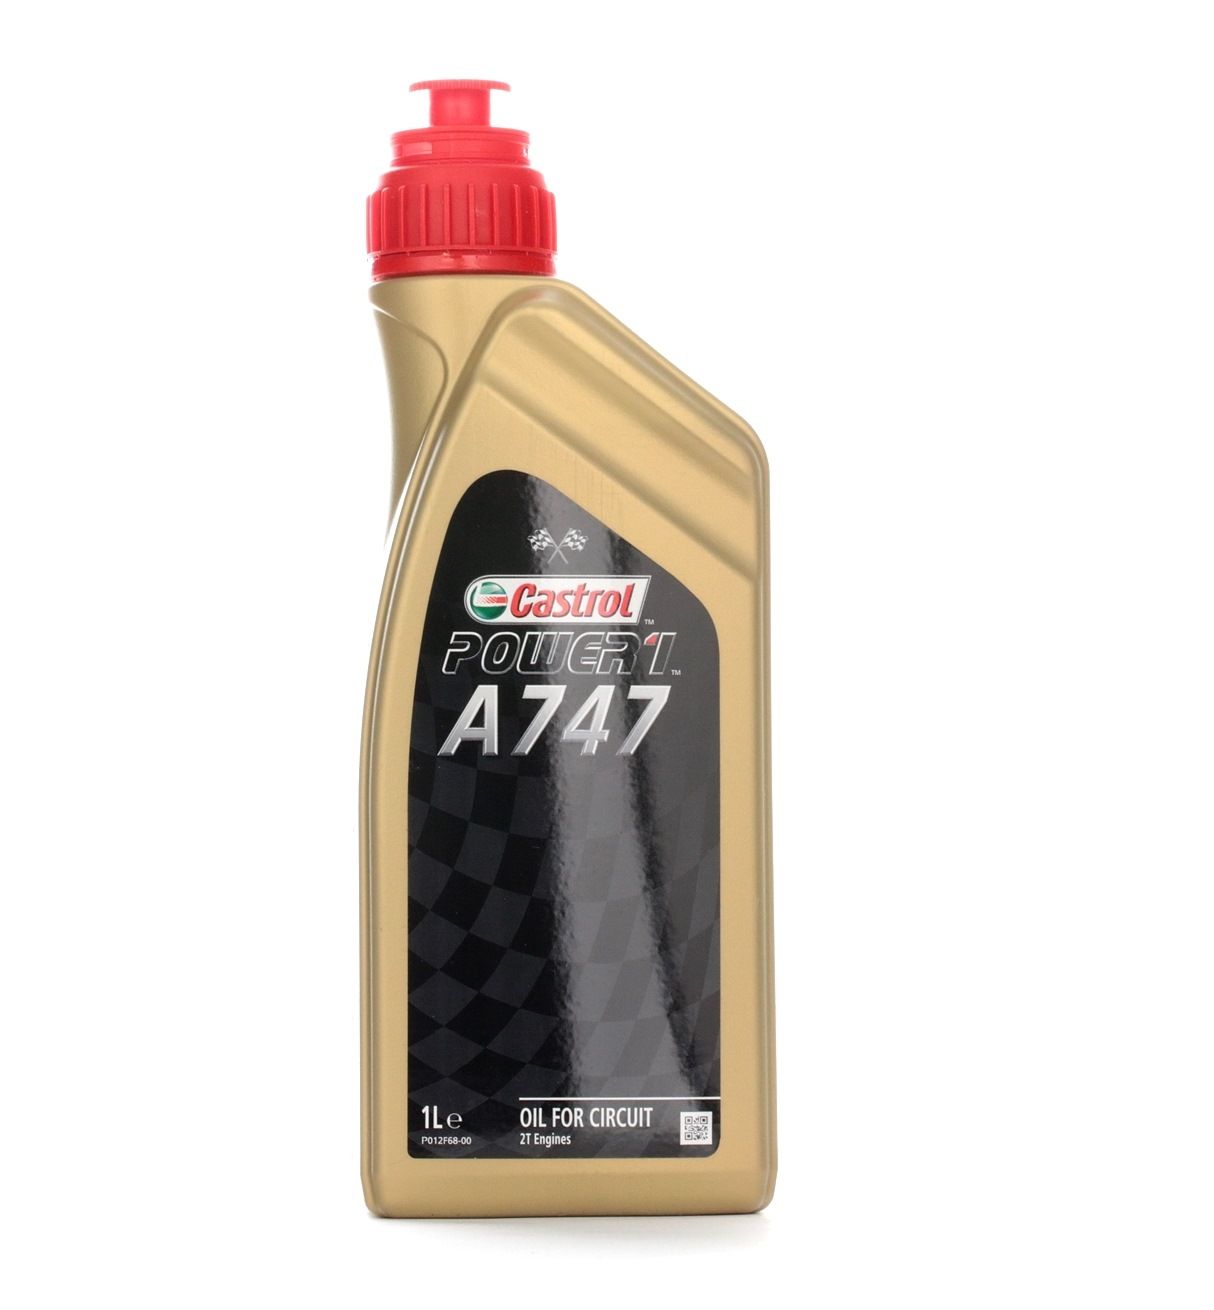 Maxi scooters Moped bike Motorcycle Engine Oil 15ADA3